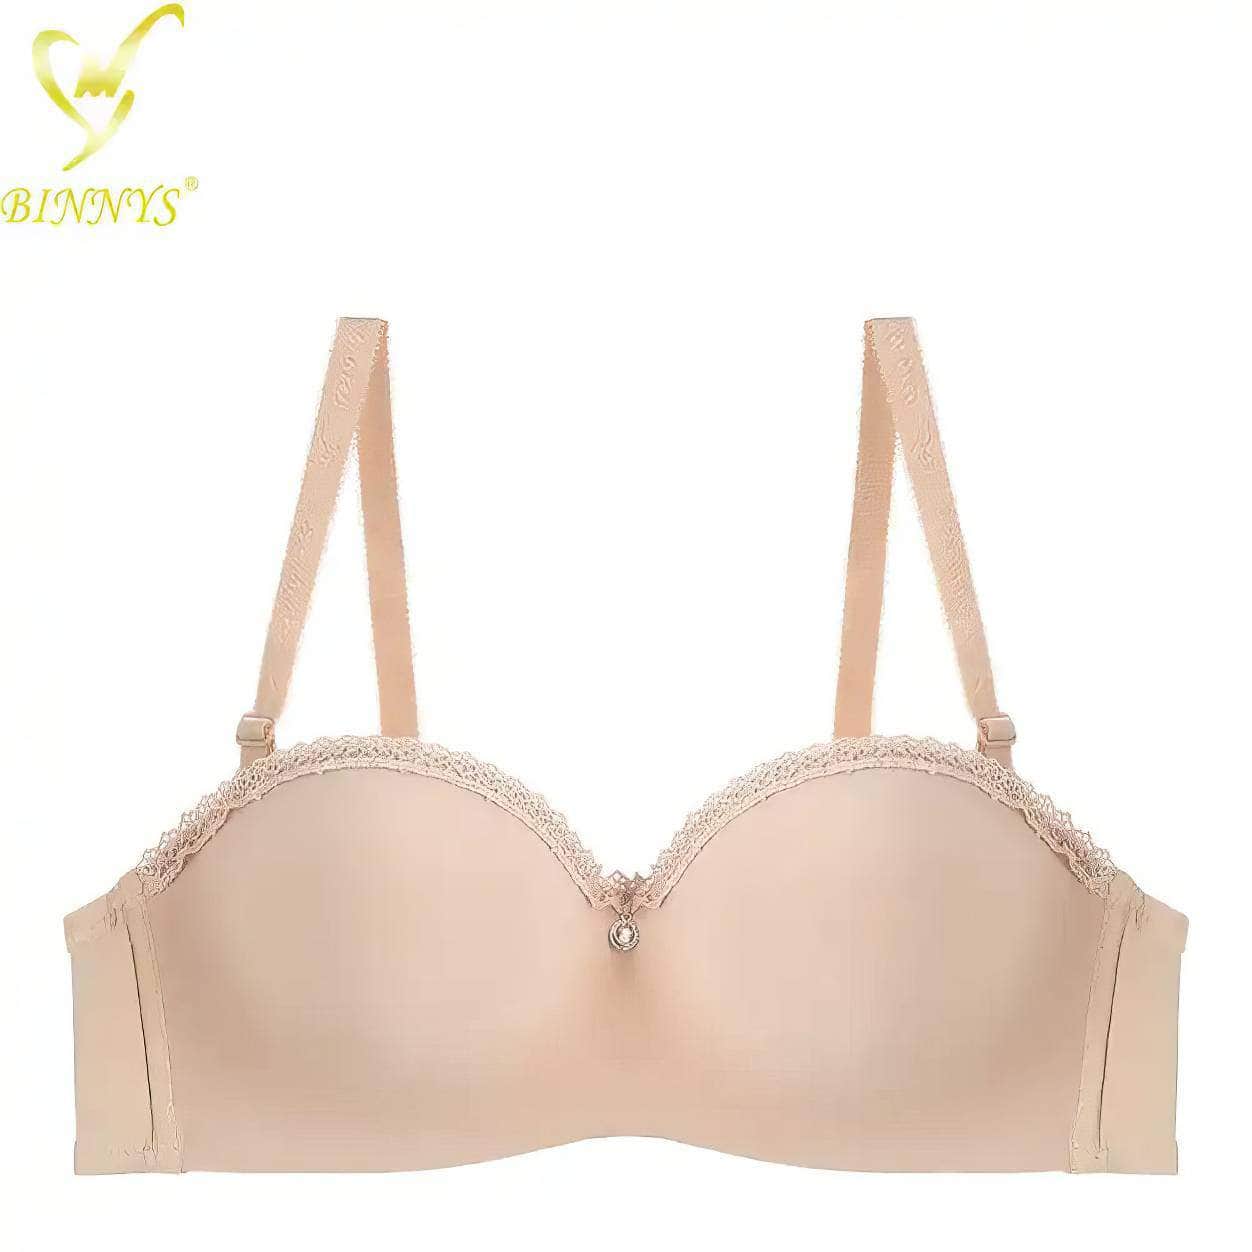 BINNYS Strapless Bra: B Cup, High-Quality Solid Nylon, Breathable, Half Cup, Ladies Underwire